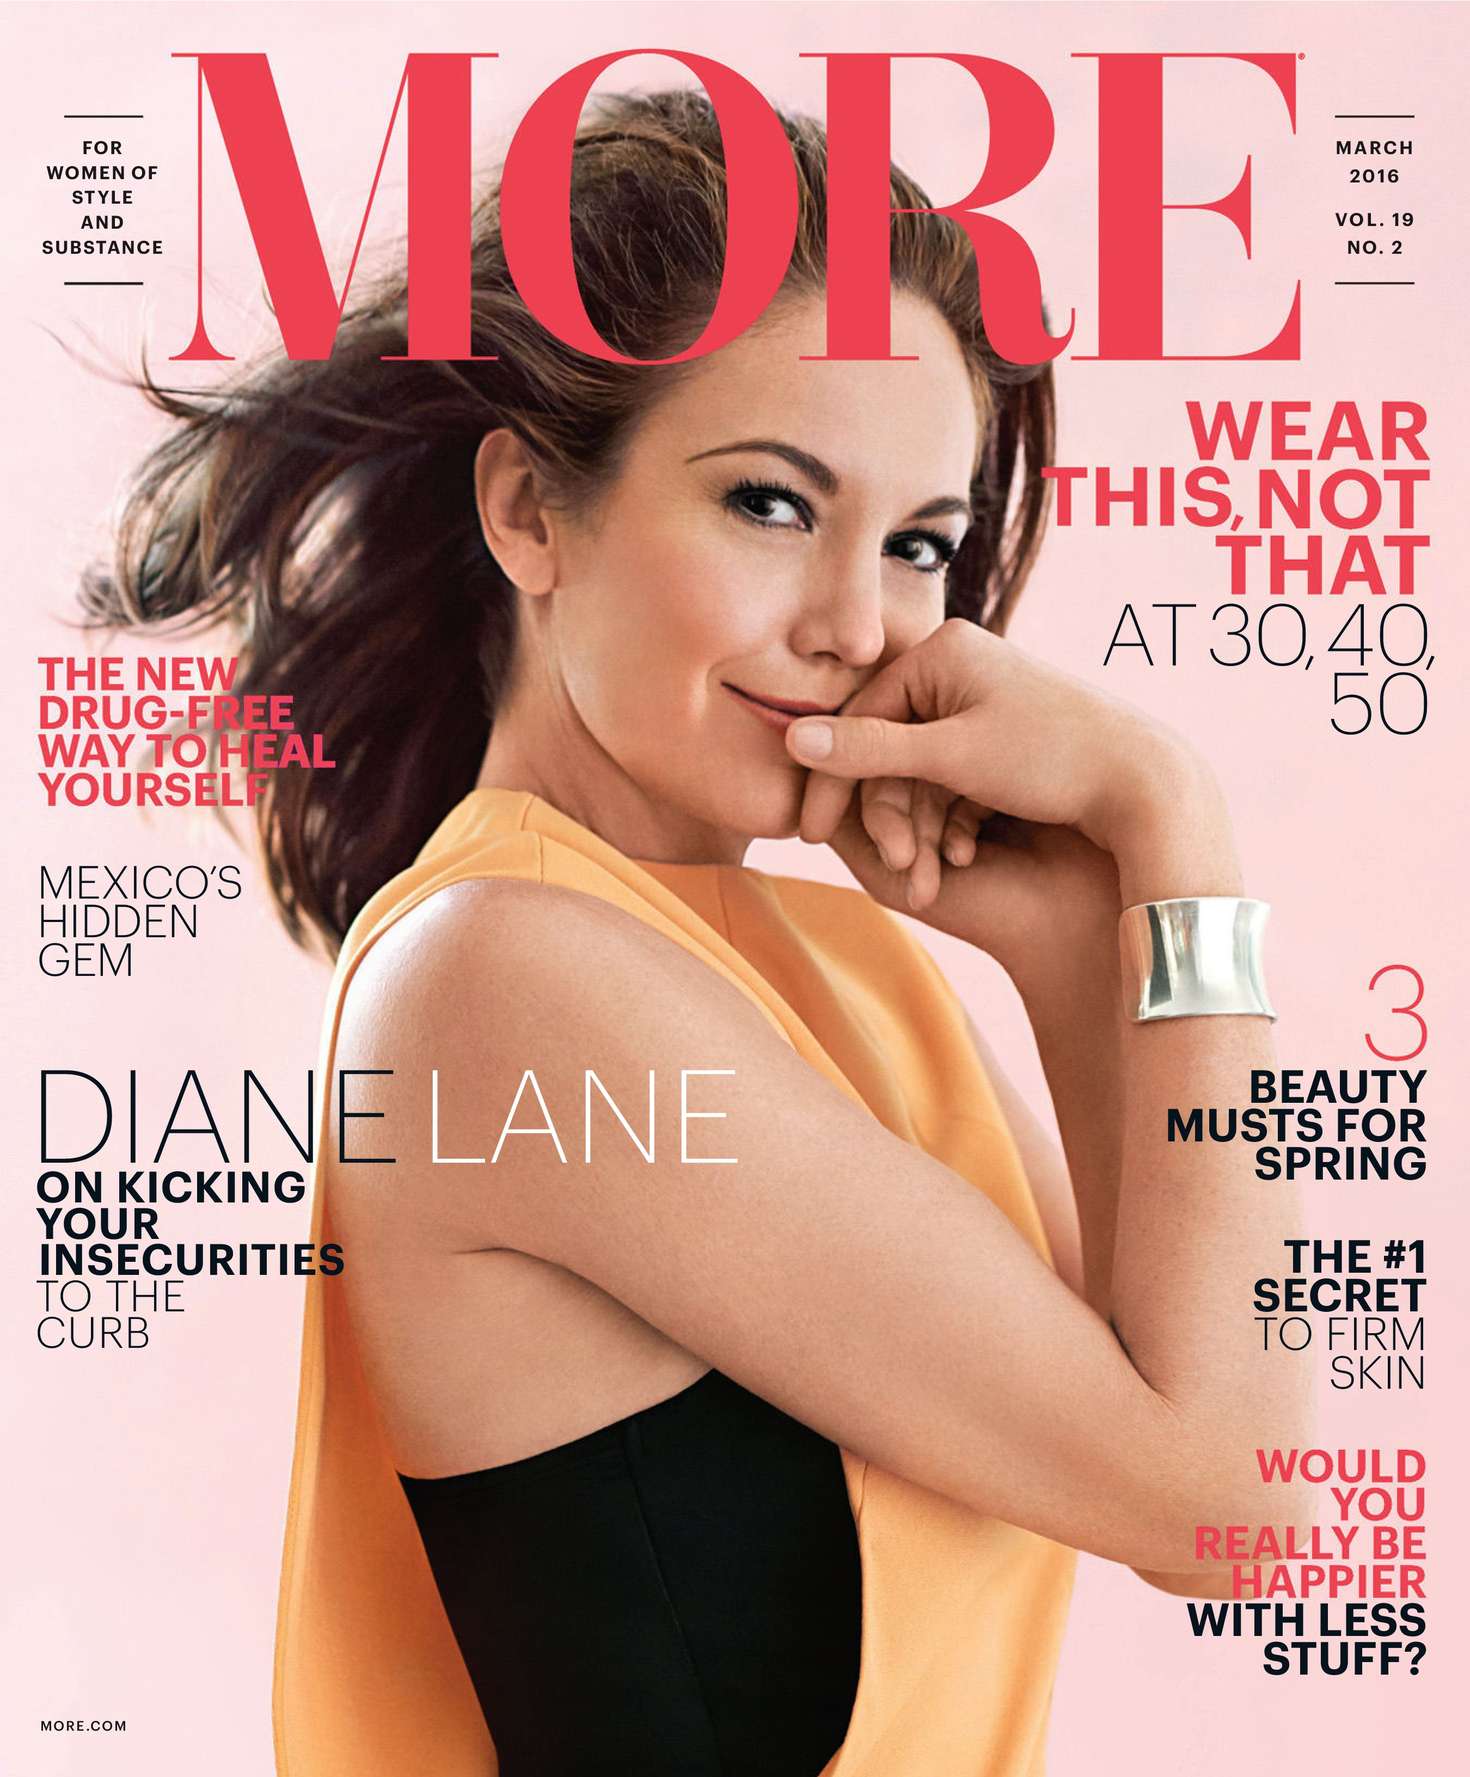 Most magazine. The most журнал. More is more журнал. Diane Lane Magazine. Женские журналы март.